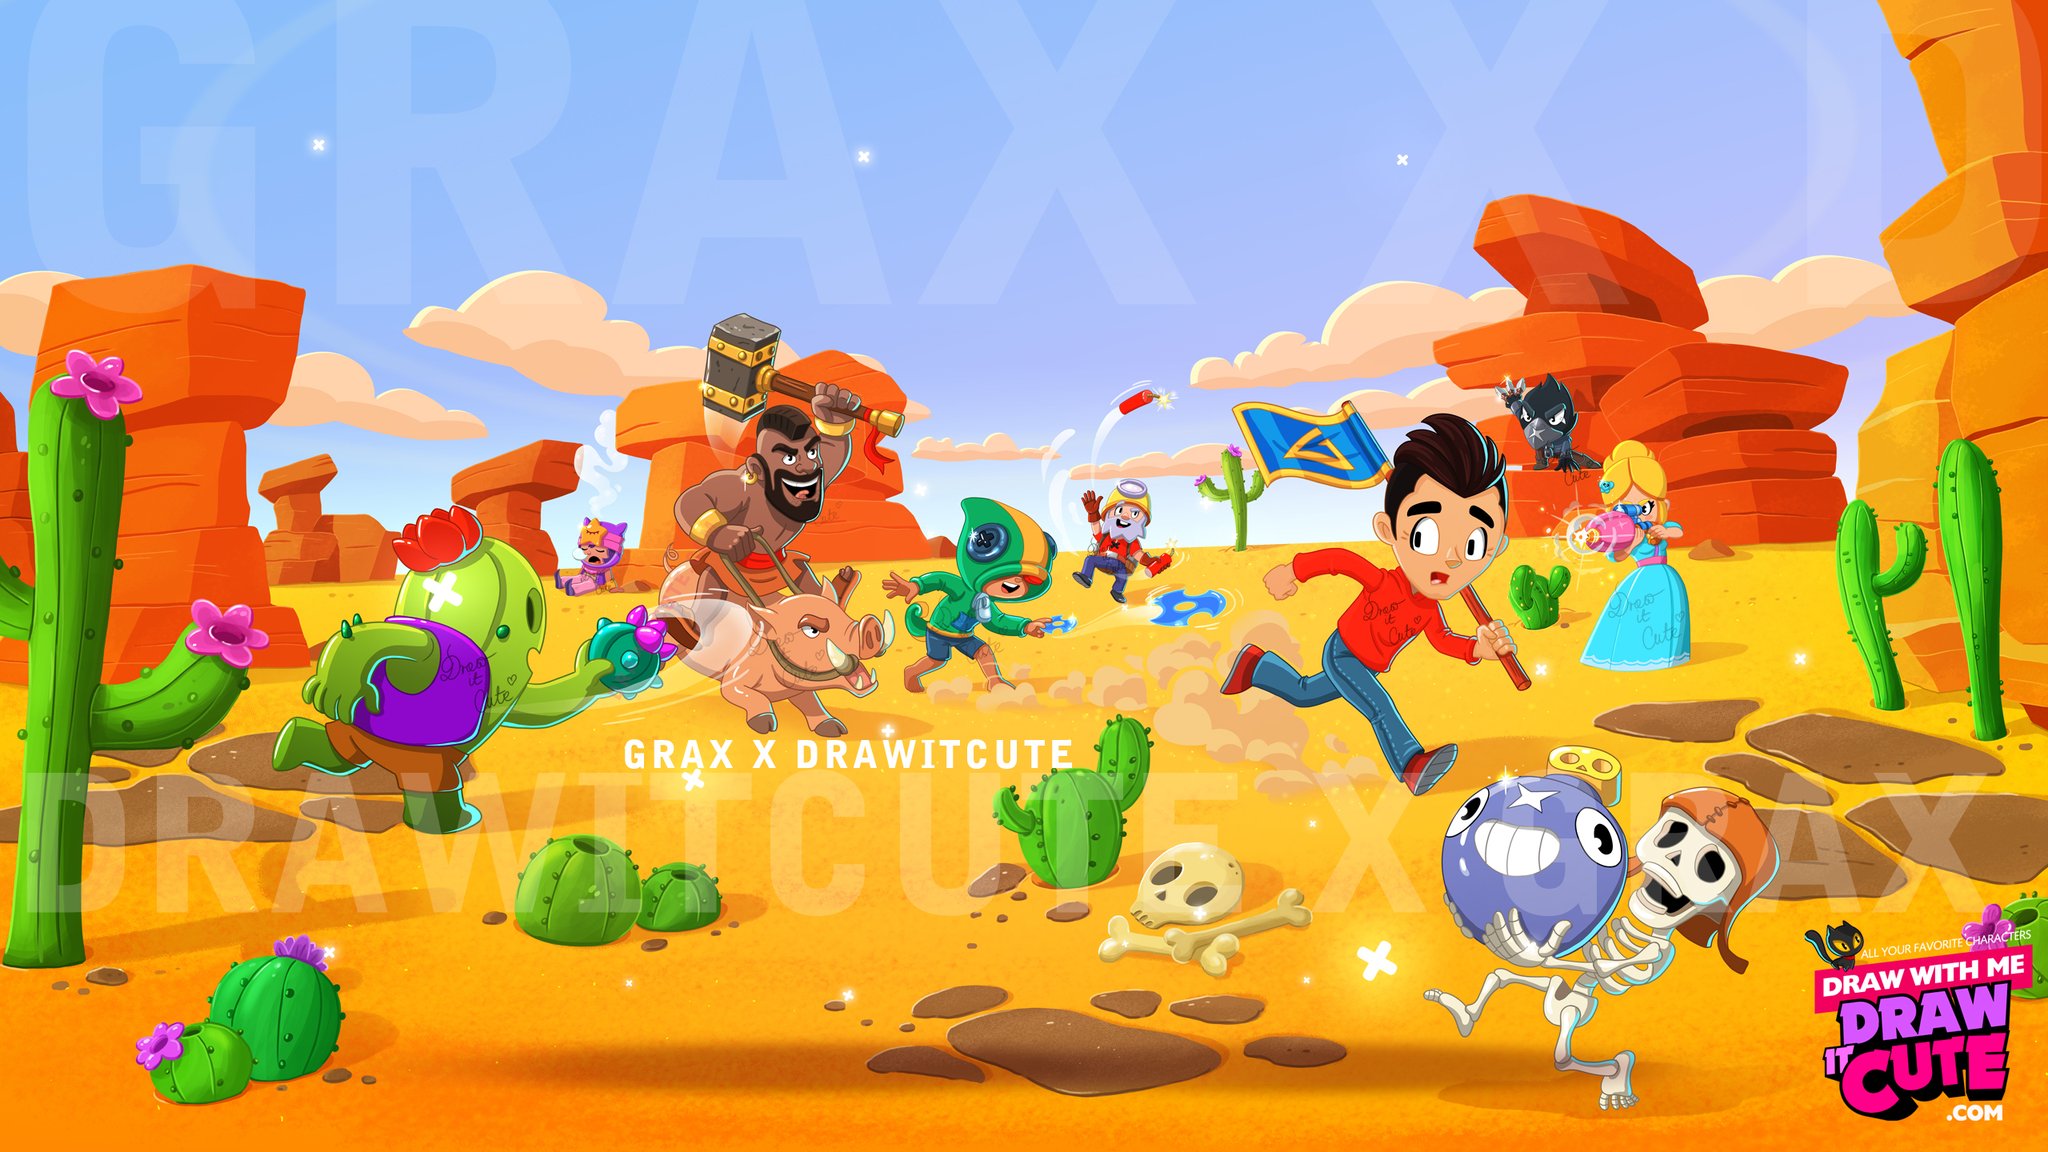 Draw It Cute On Twitter I Am So Happy And Proud That Grax Asked Me To Create A Youtube Banner For His Channel Https T Co Ehufrdi7ta Sorry For All The Watermarks But My - brawl stars banner 2048x1152